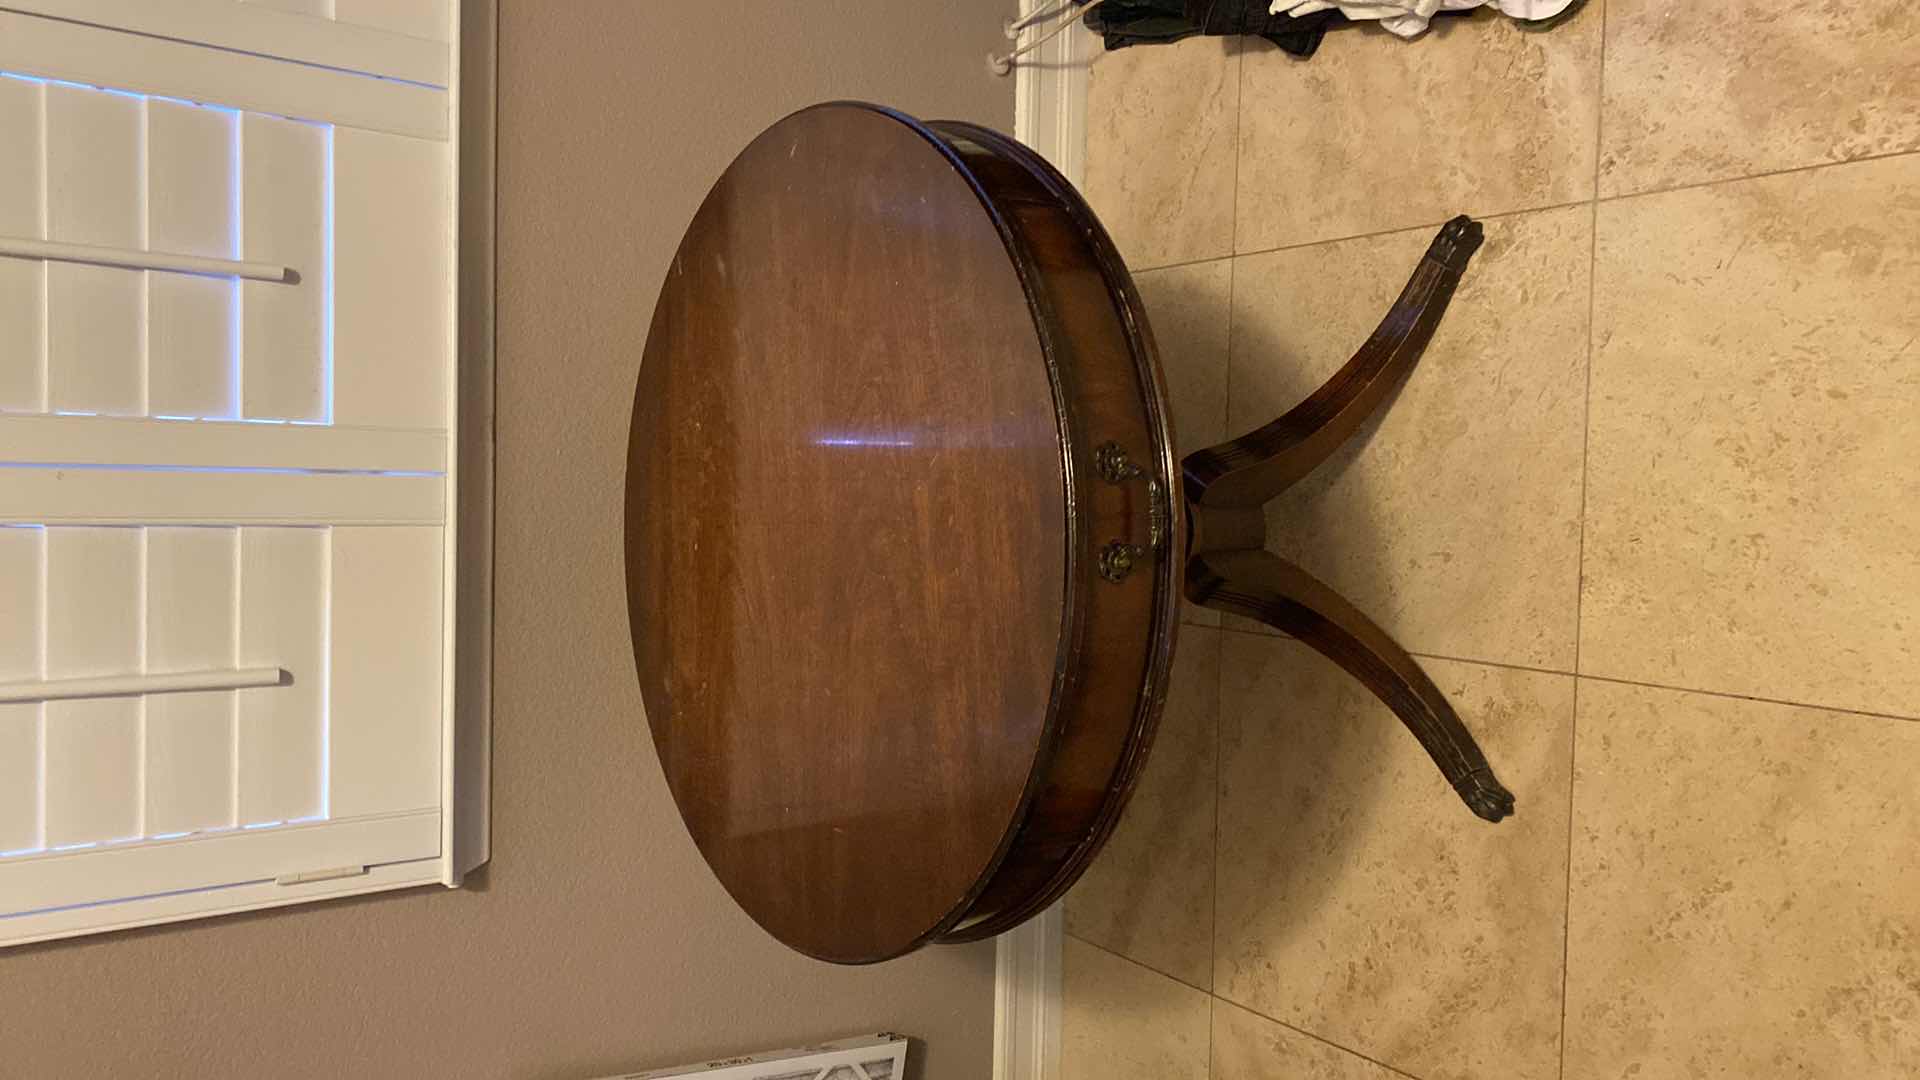 Photo 2 of VINTAGE WOOD ROUND TABLE 28” x 28” SCRATCHES AND SHOWS WEAR